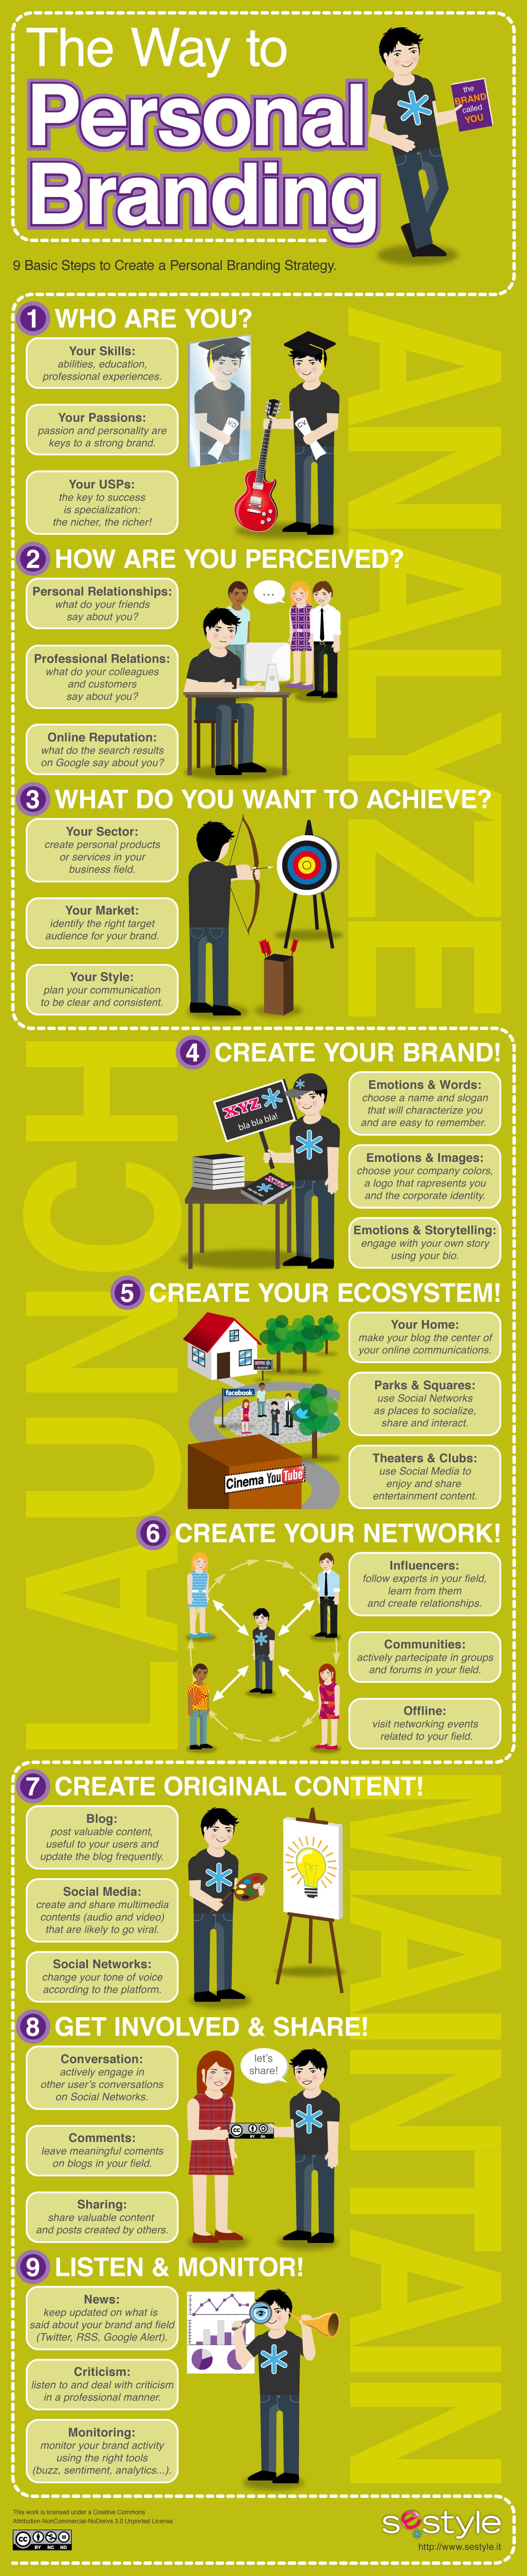 9 Steps To Better Personal Branding [Infographic]